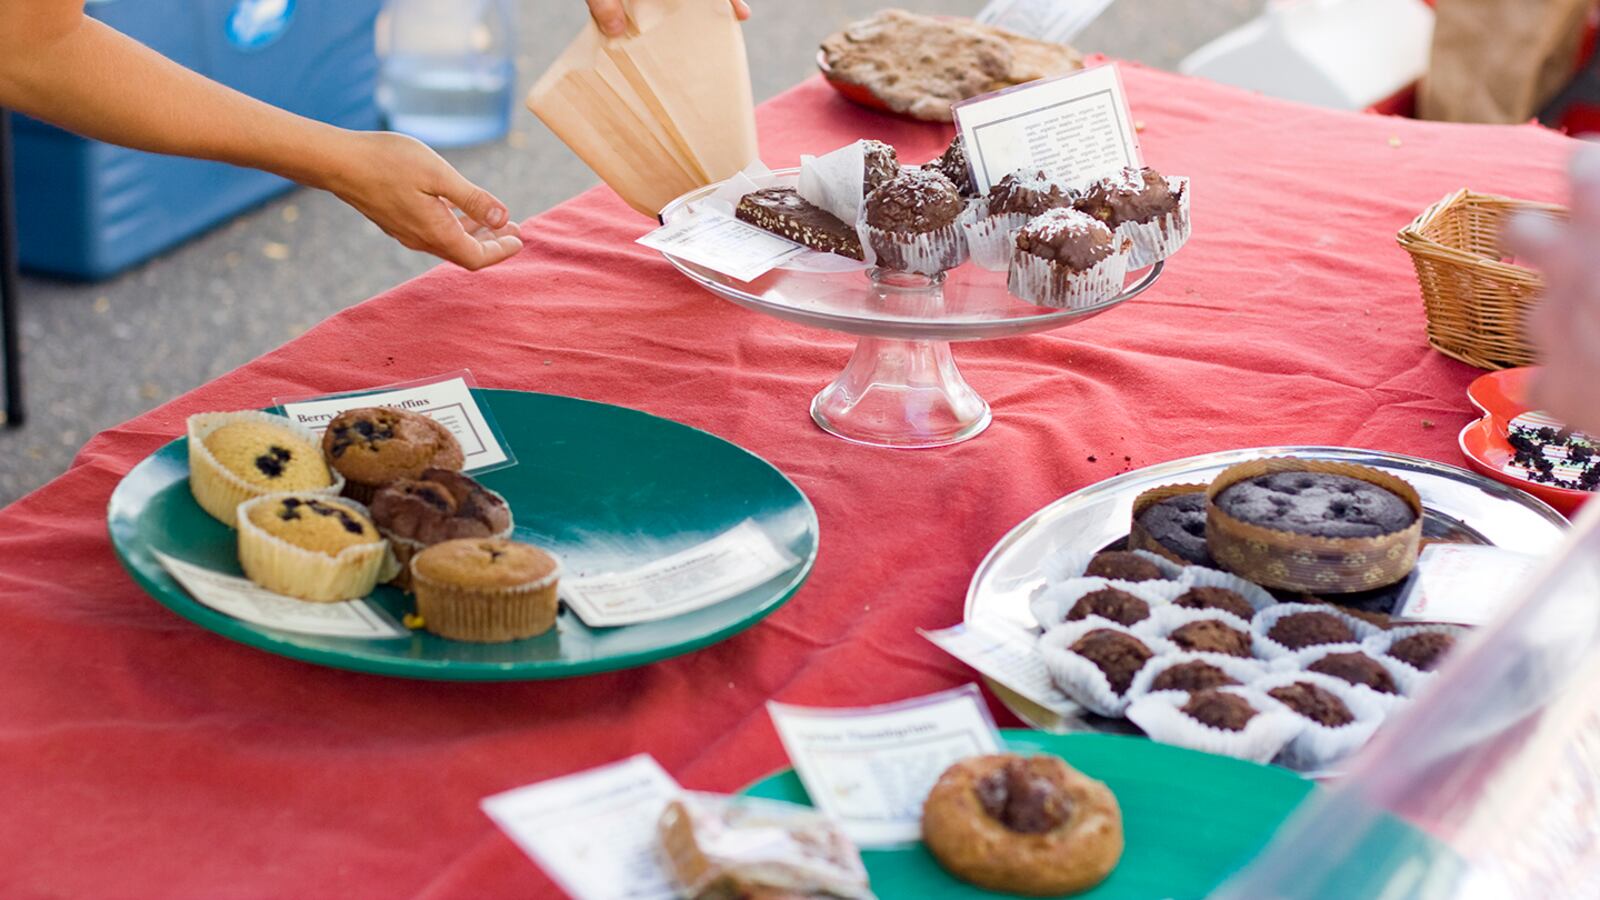 One hand holds open a pastry bag while the other hand reaches for a sweet treat on a table full of baked goods with a red table cloth.